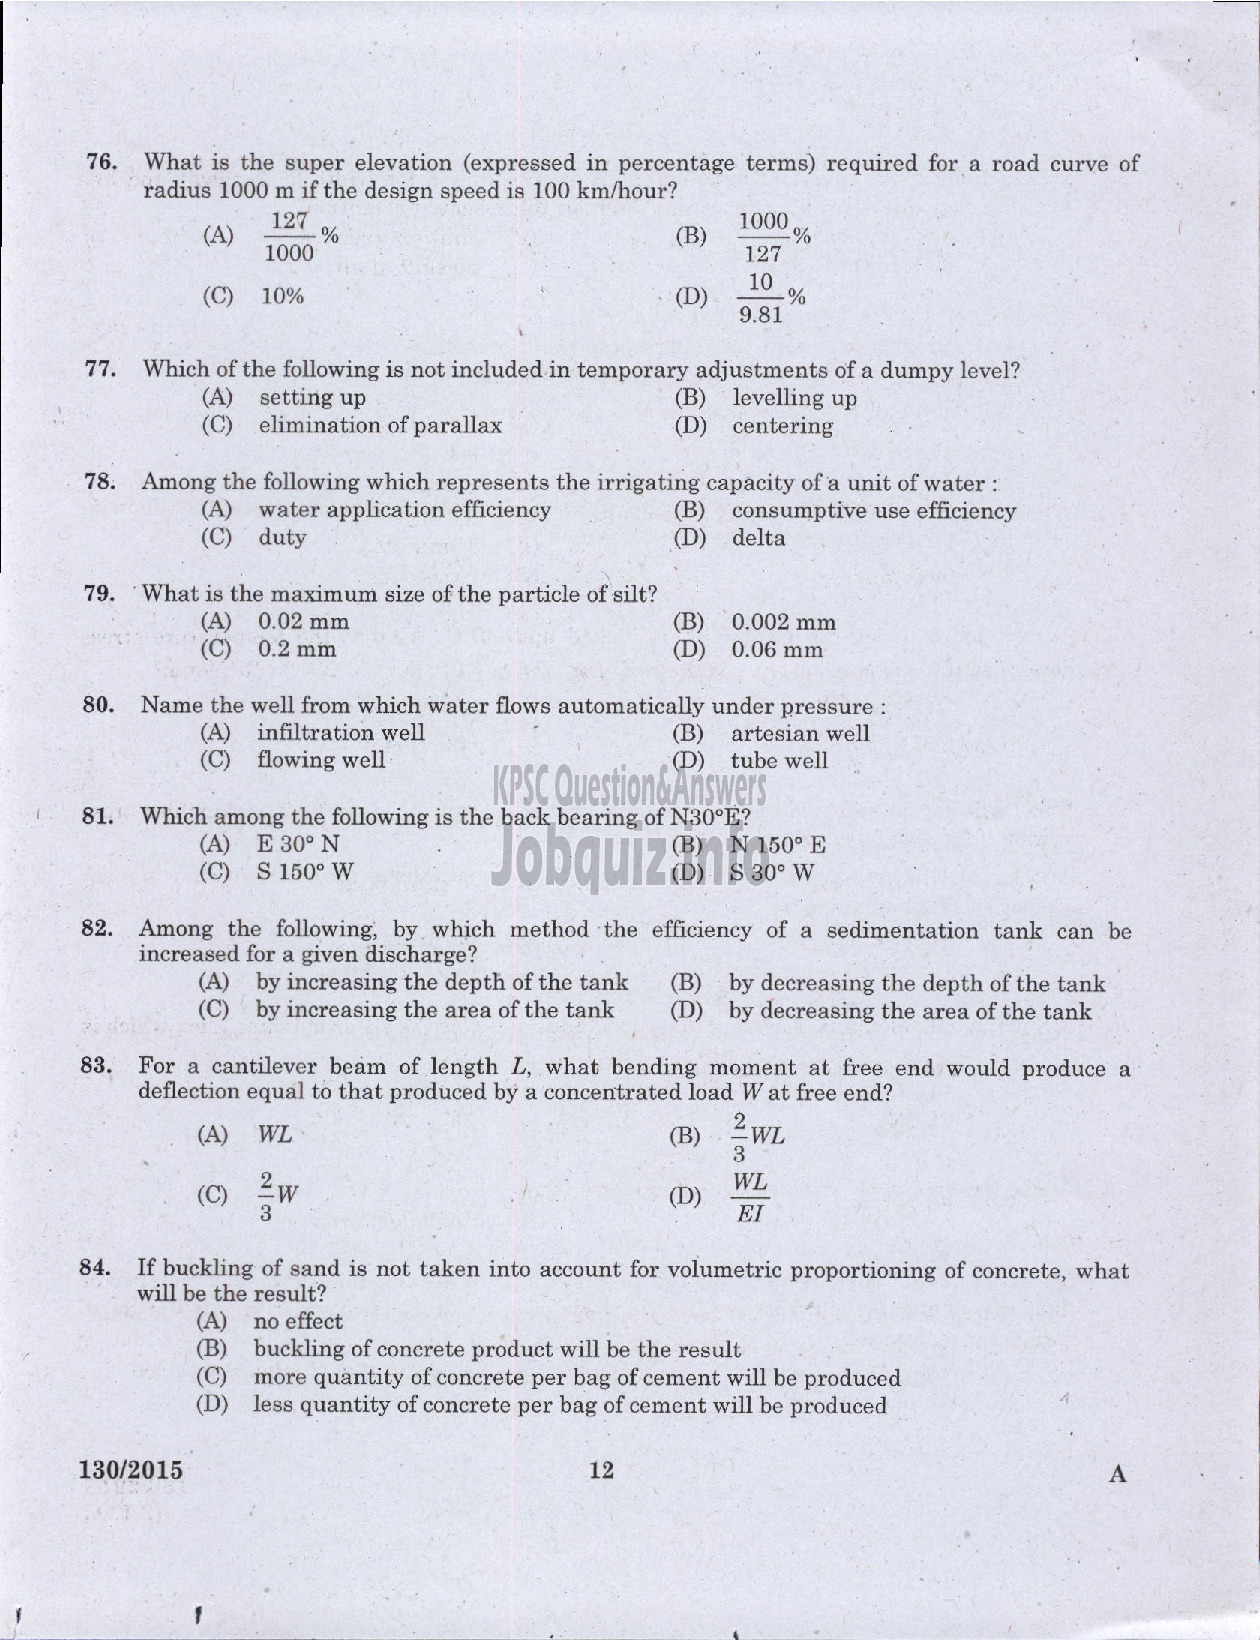 Kerala PSC Question Paper - ASSISTANT ENGINEER CIVIL LOCAL SELF GOVERNMENT/PWD/IRRIGATION-10